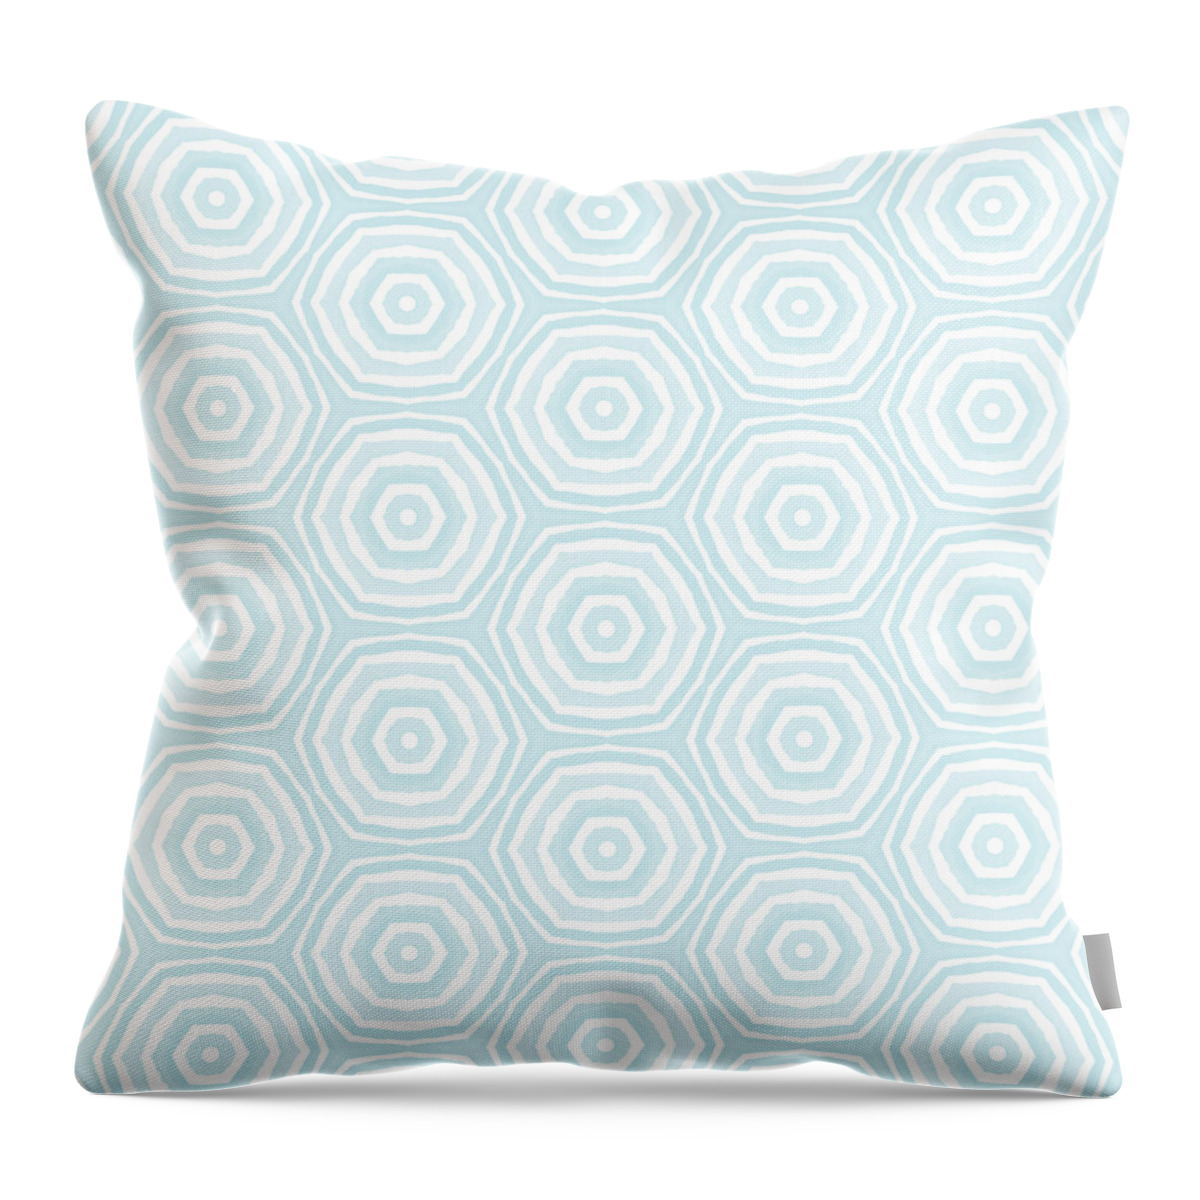 Circles Throw Pillow featuring the digital art Dip In The Pool - Pattern Art by Linda Woods by Linda Woods